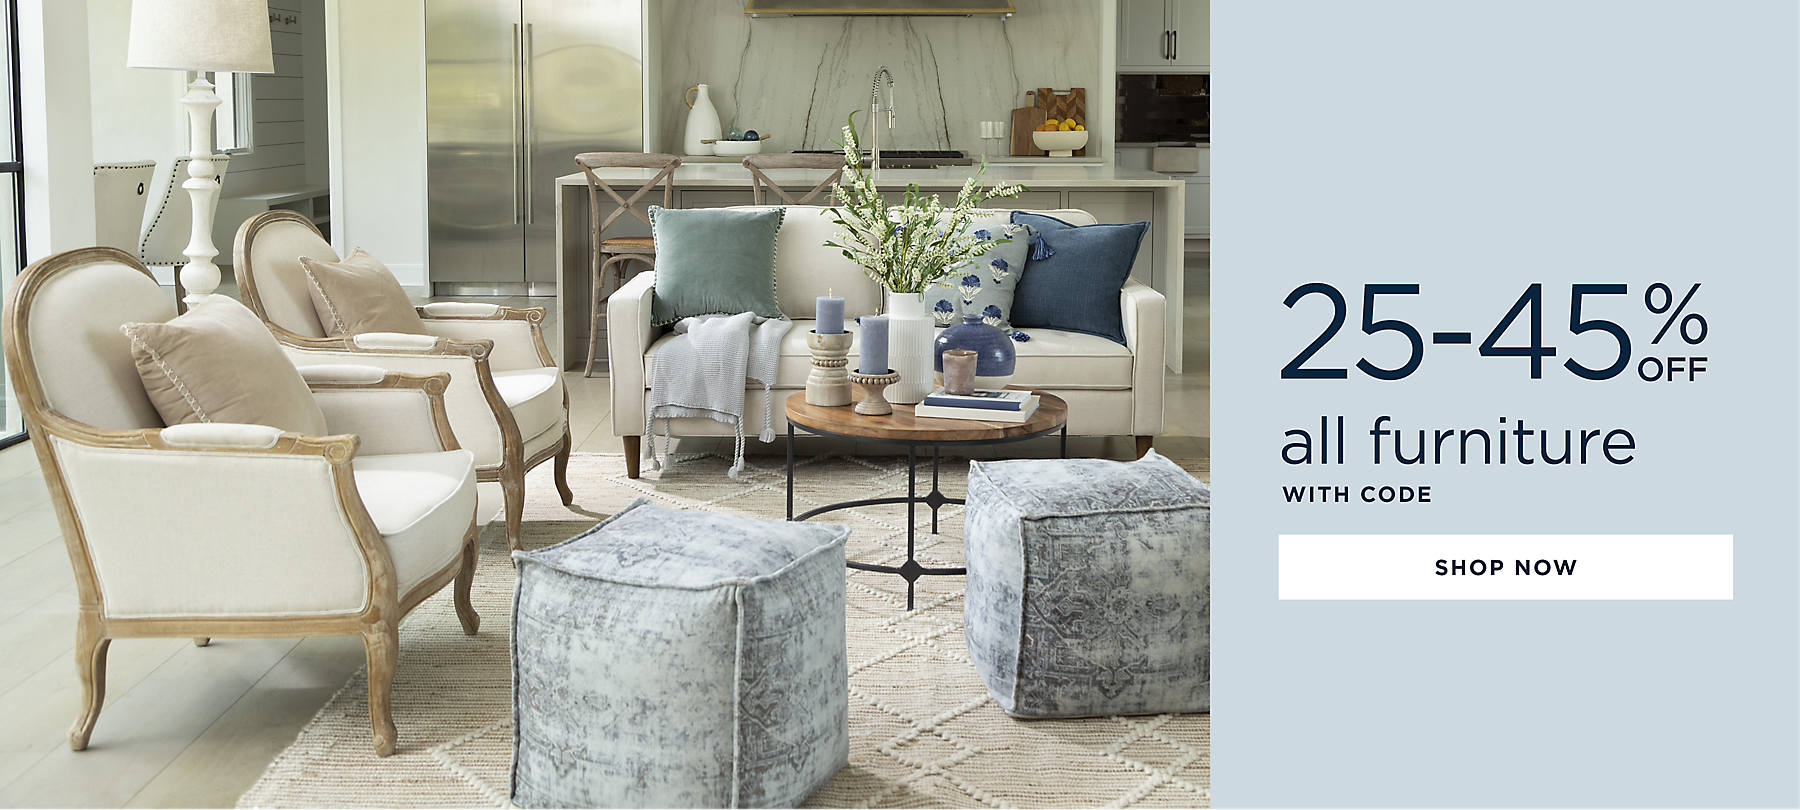 25-45% off all furniture with code shop now